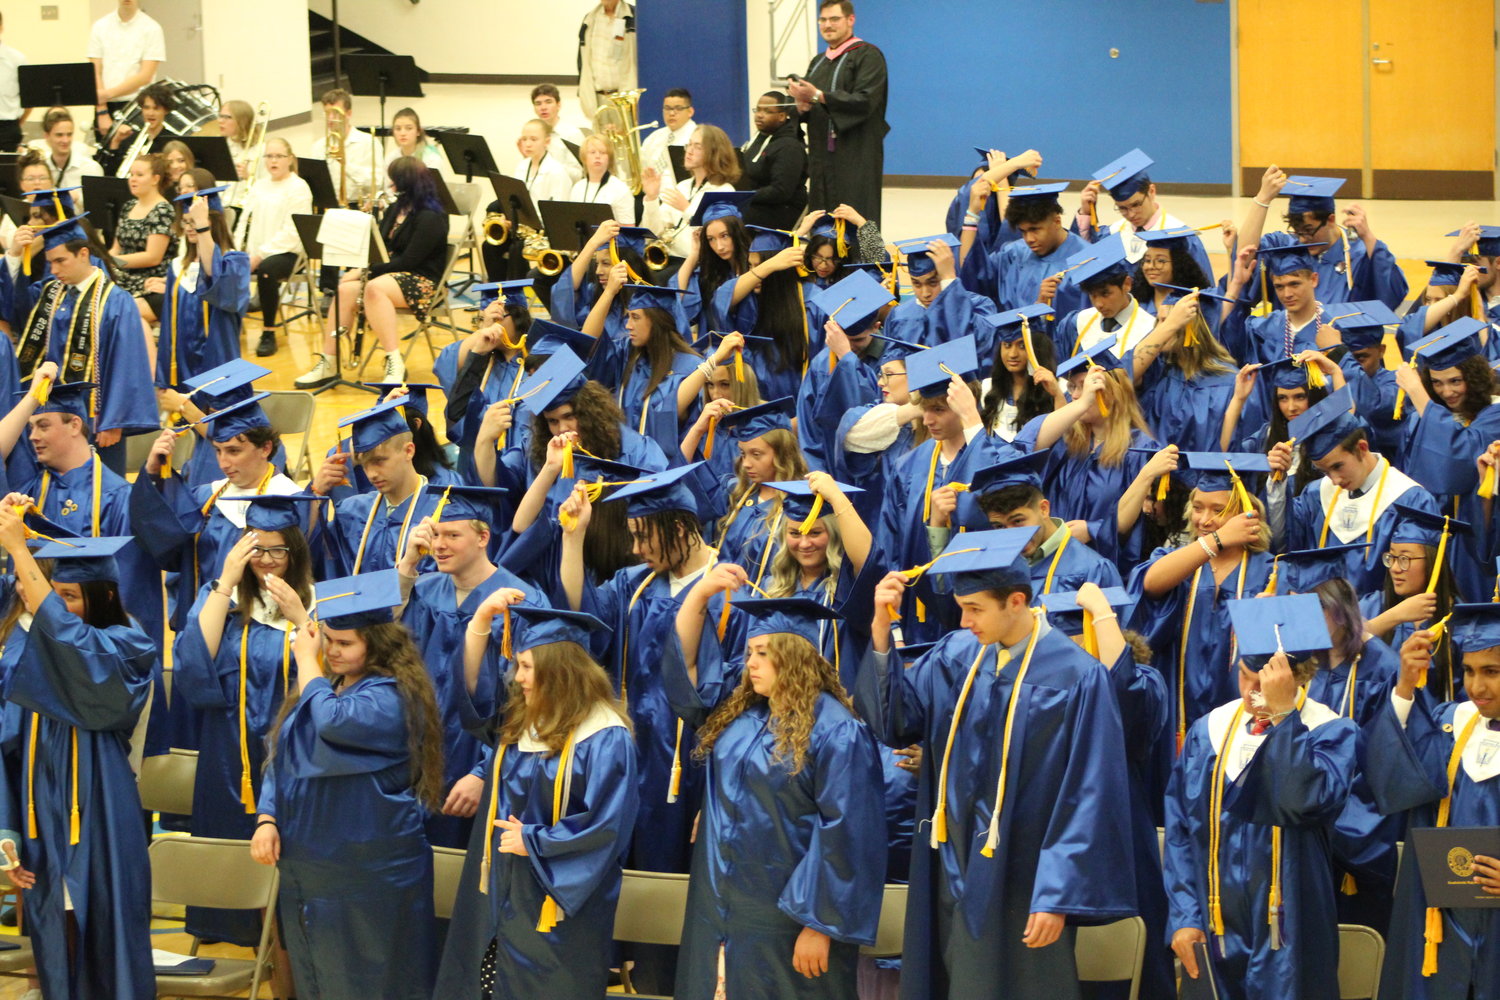 The Class of 2022 is officially recognized as graduates as they turn their tassels.